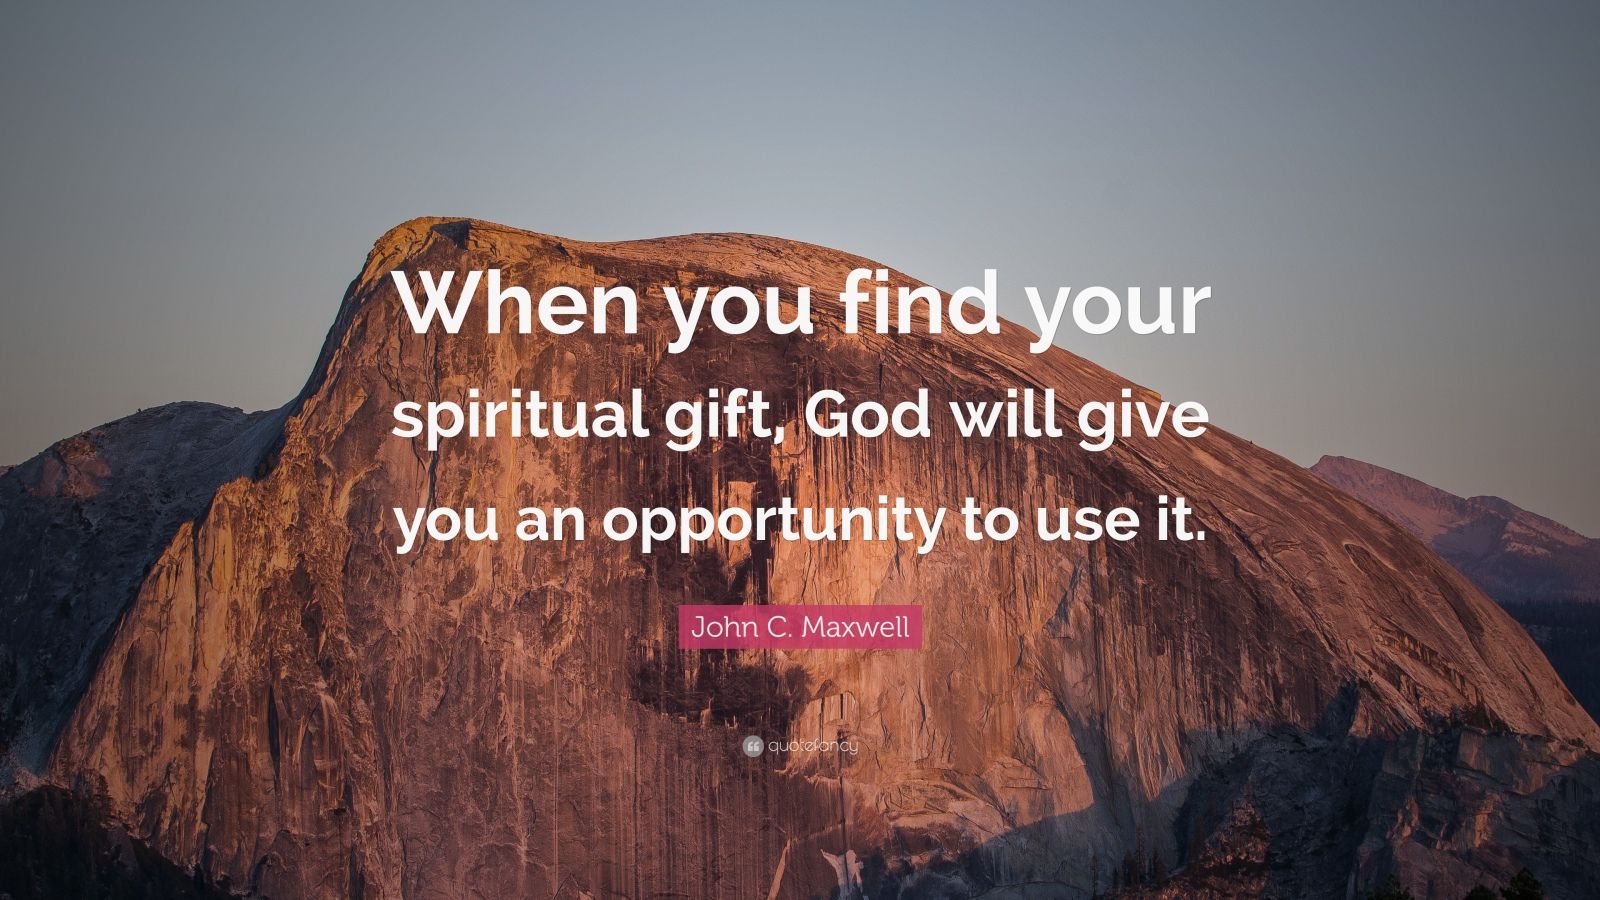 1820954 John C Maxwell Quote When you find your spiritual gift God will